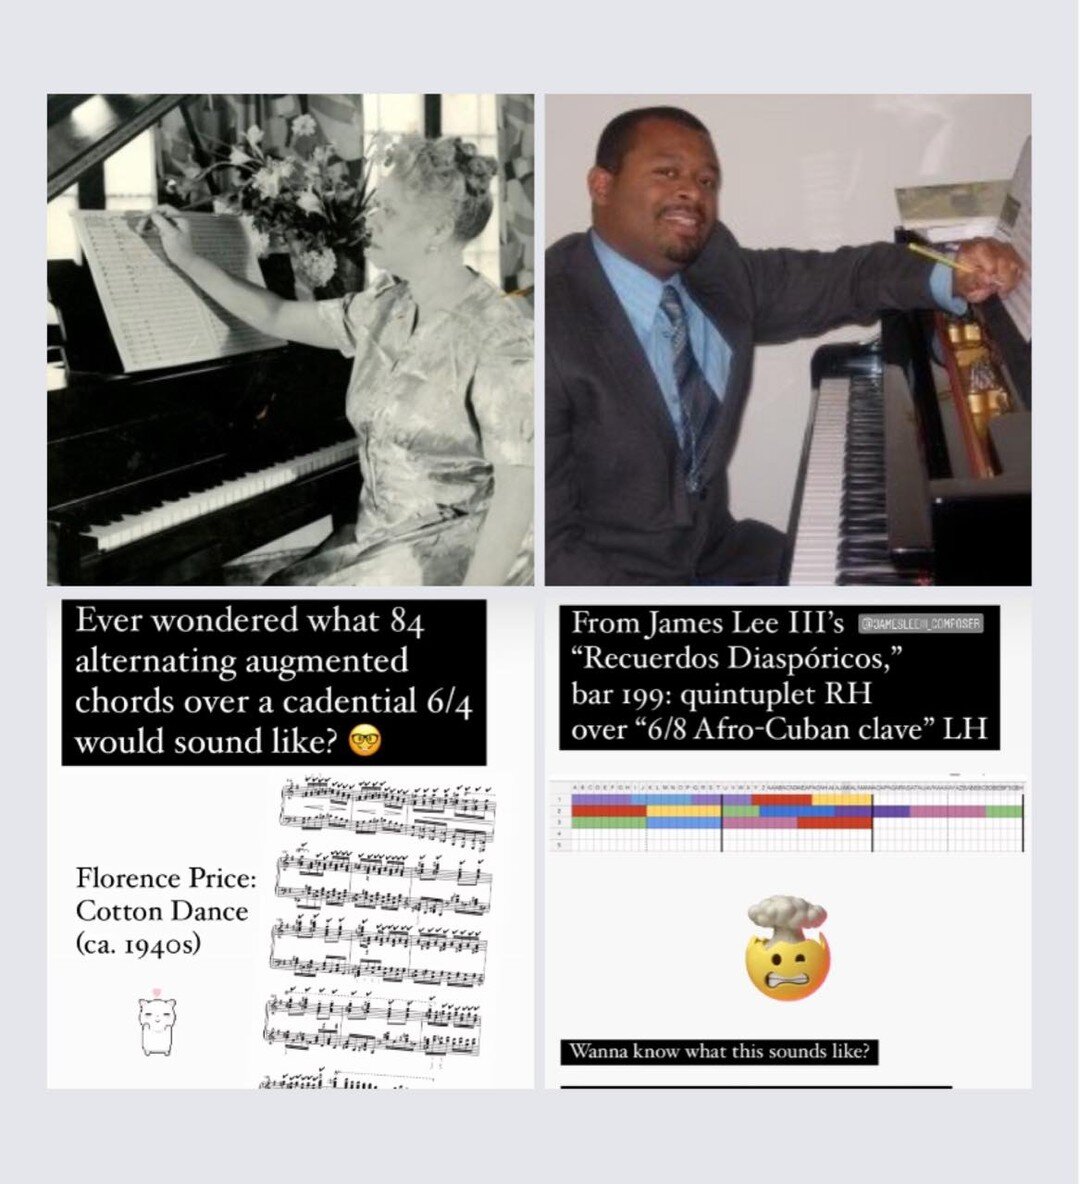 Tonight at 7:30 ET: newly rediscovered piano music of Florence Price and the world premiere of &ldquo;Recuerdos Diasp&oacute;ricos&rdquo; by James Lee III. Live-streaming from Grand Valley State University; link in bio.
@jamesleeiii_composer @gvsumtd